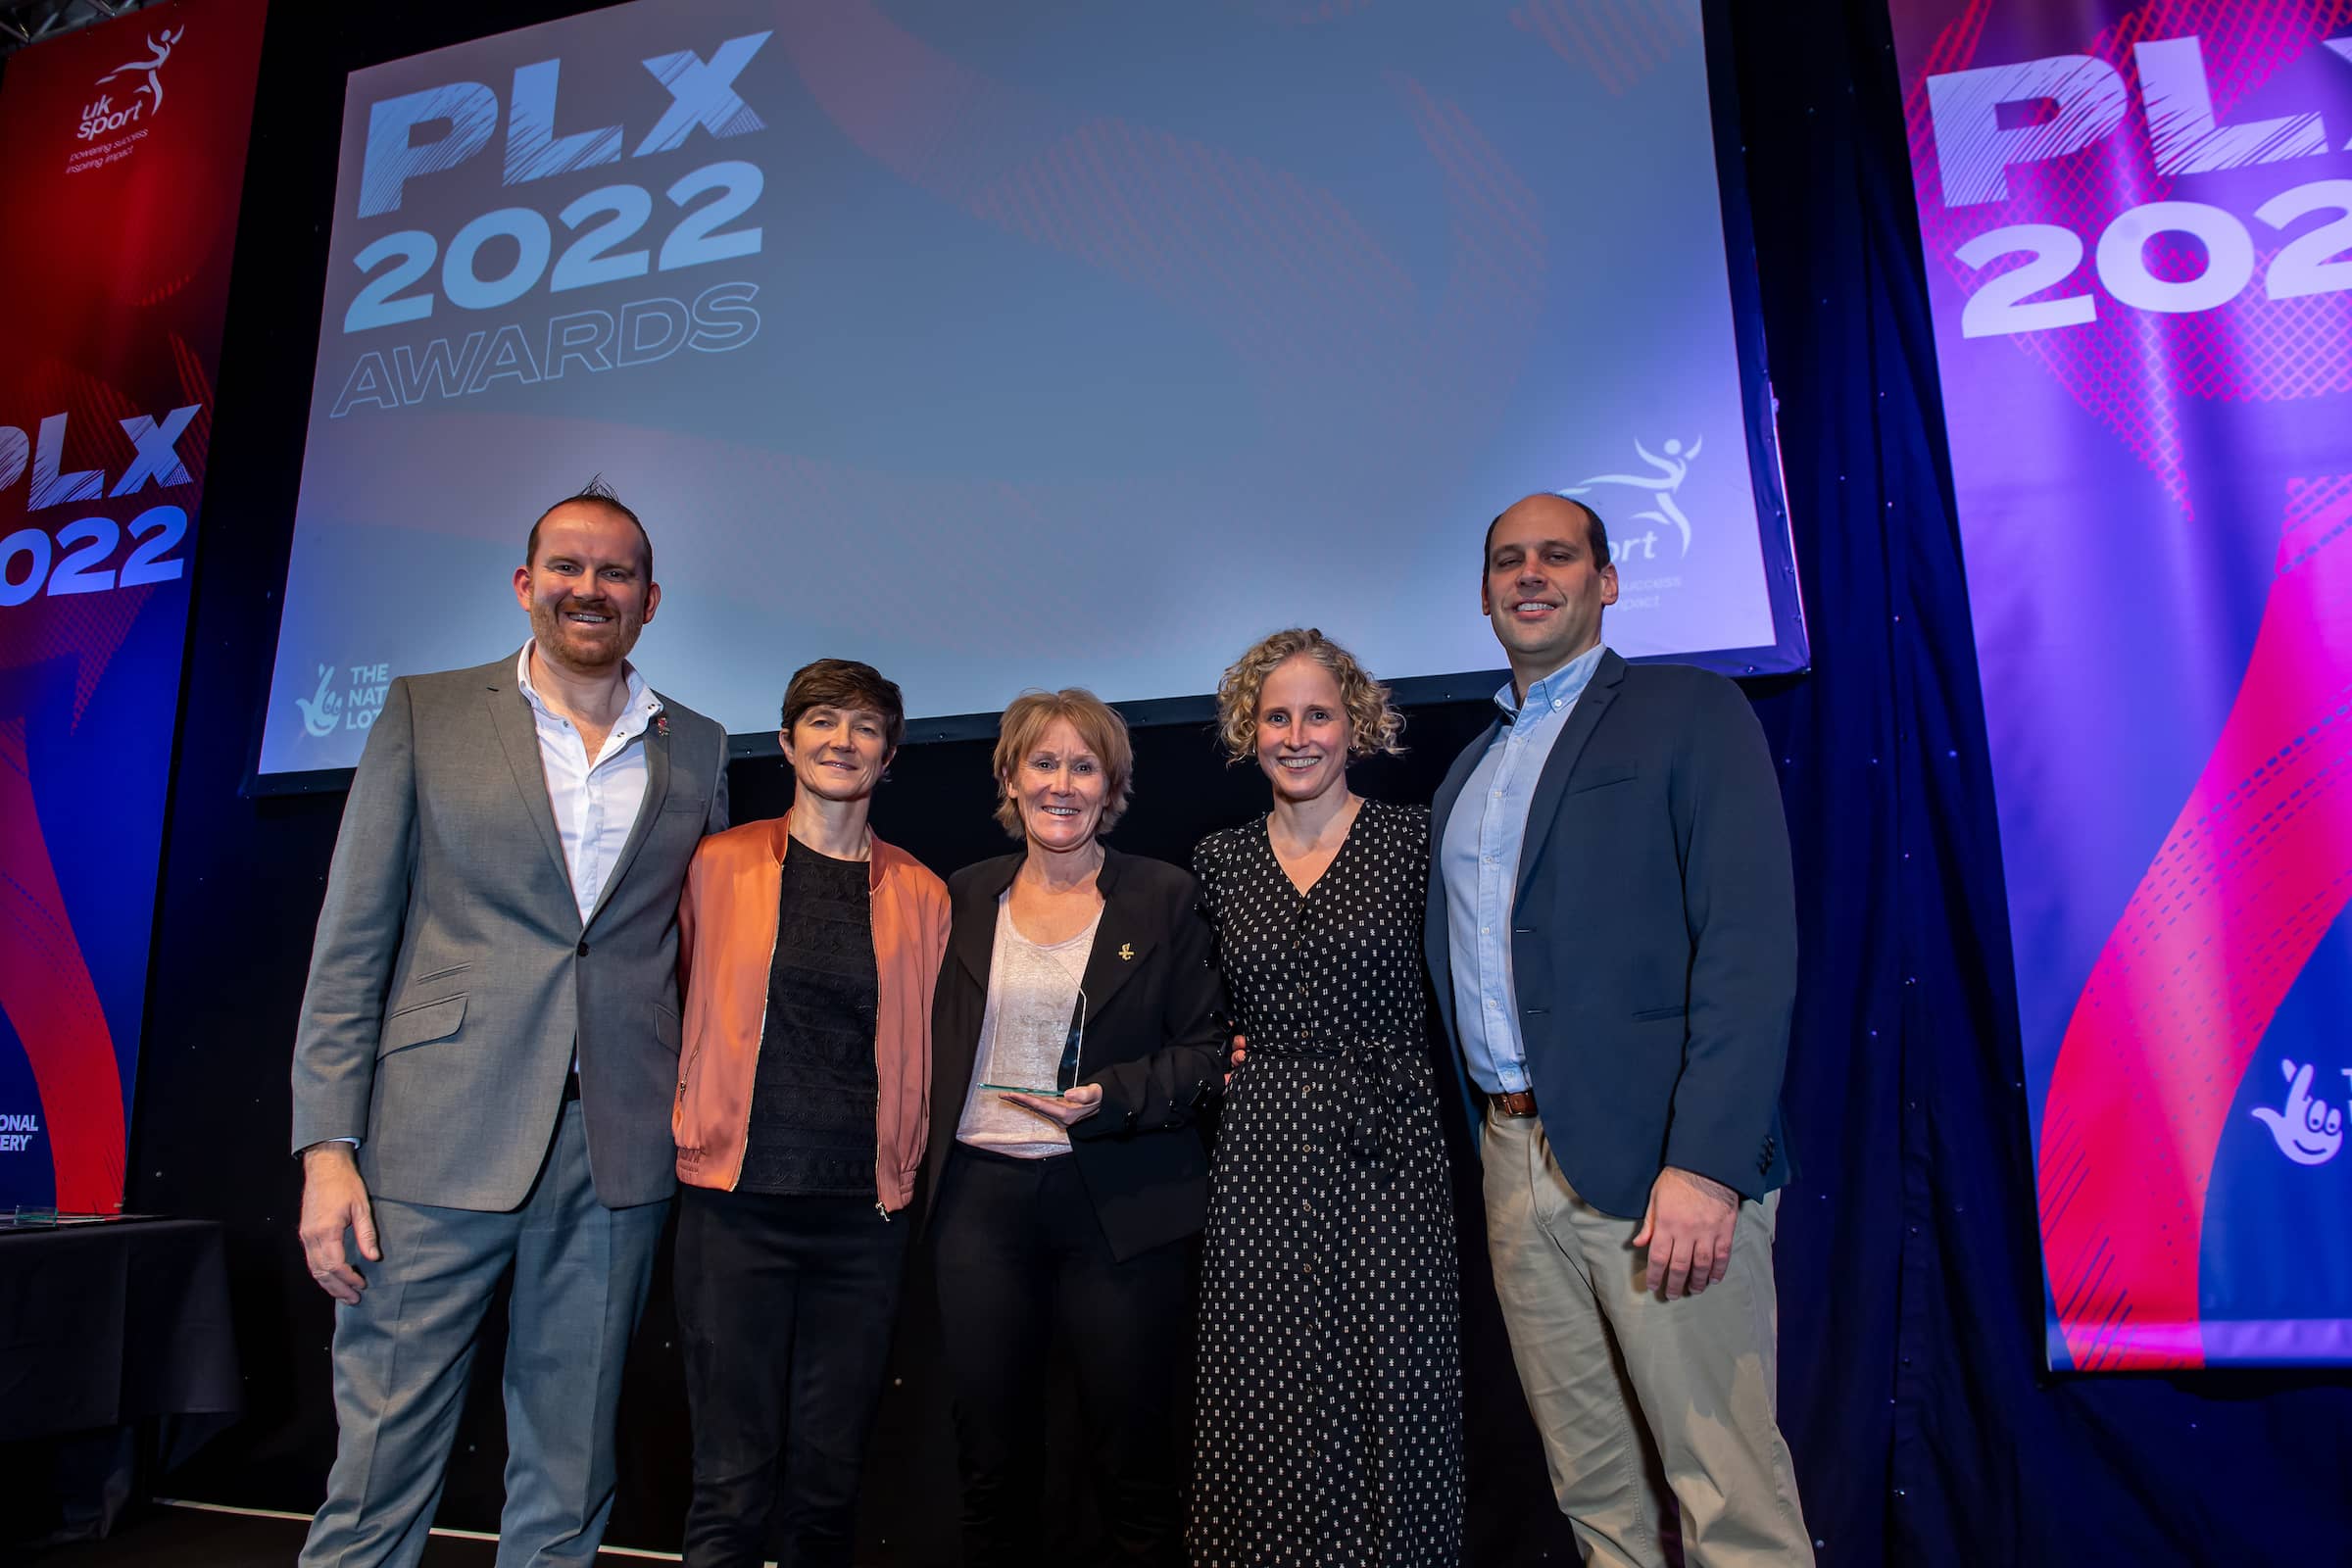 Year of extraordinary sporting moments recognised at high-performance uk sport plx awards 2022